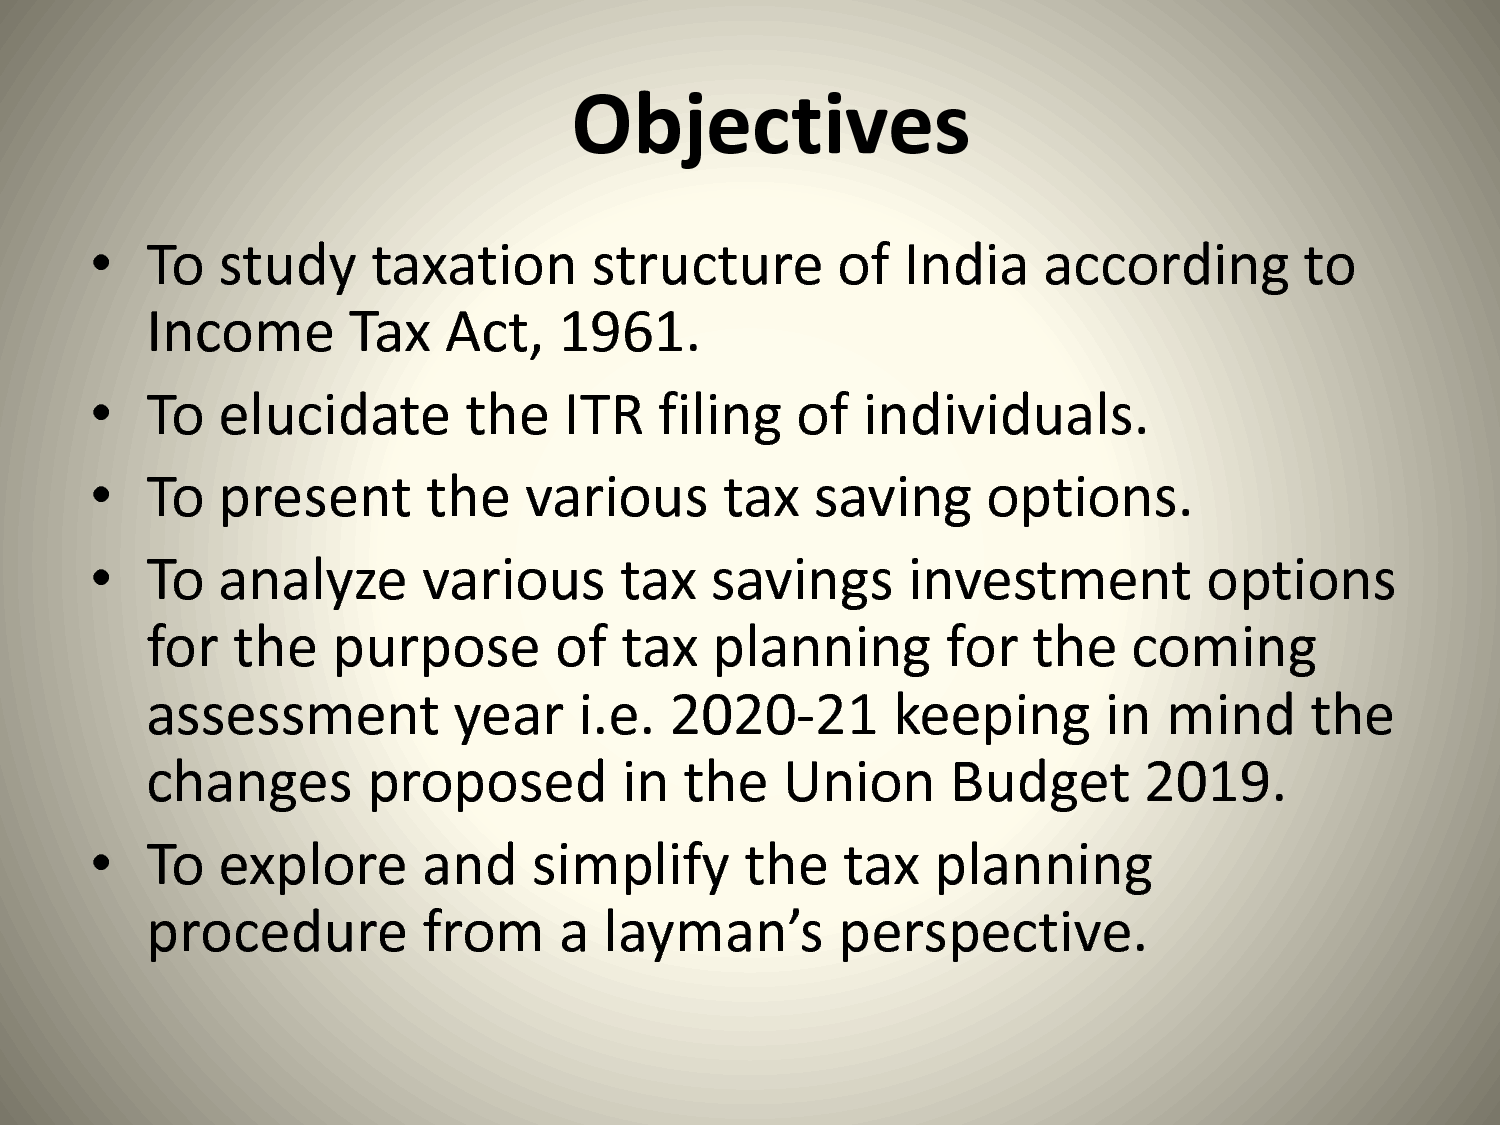 What Is The Purpose Of Tax Planning?